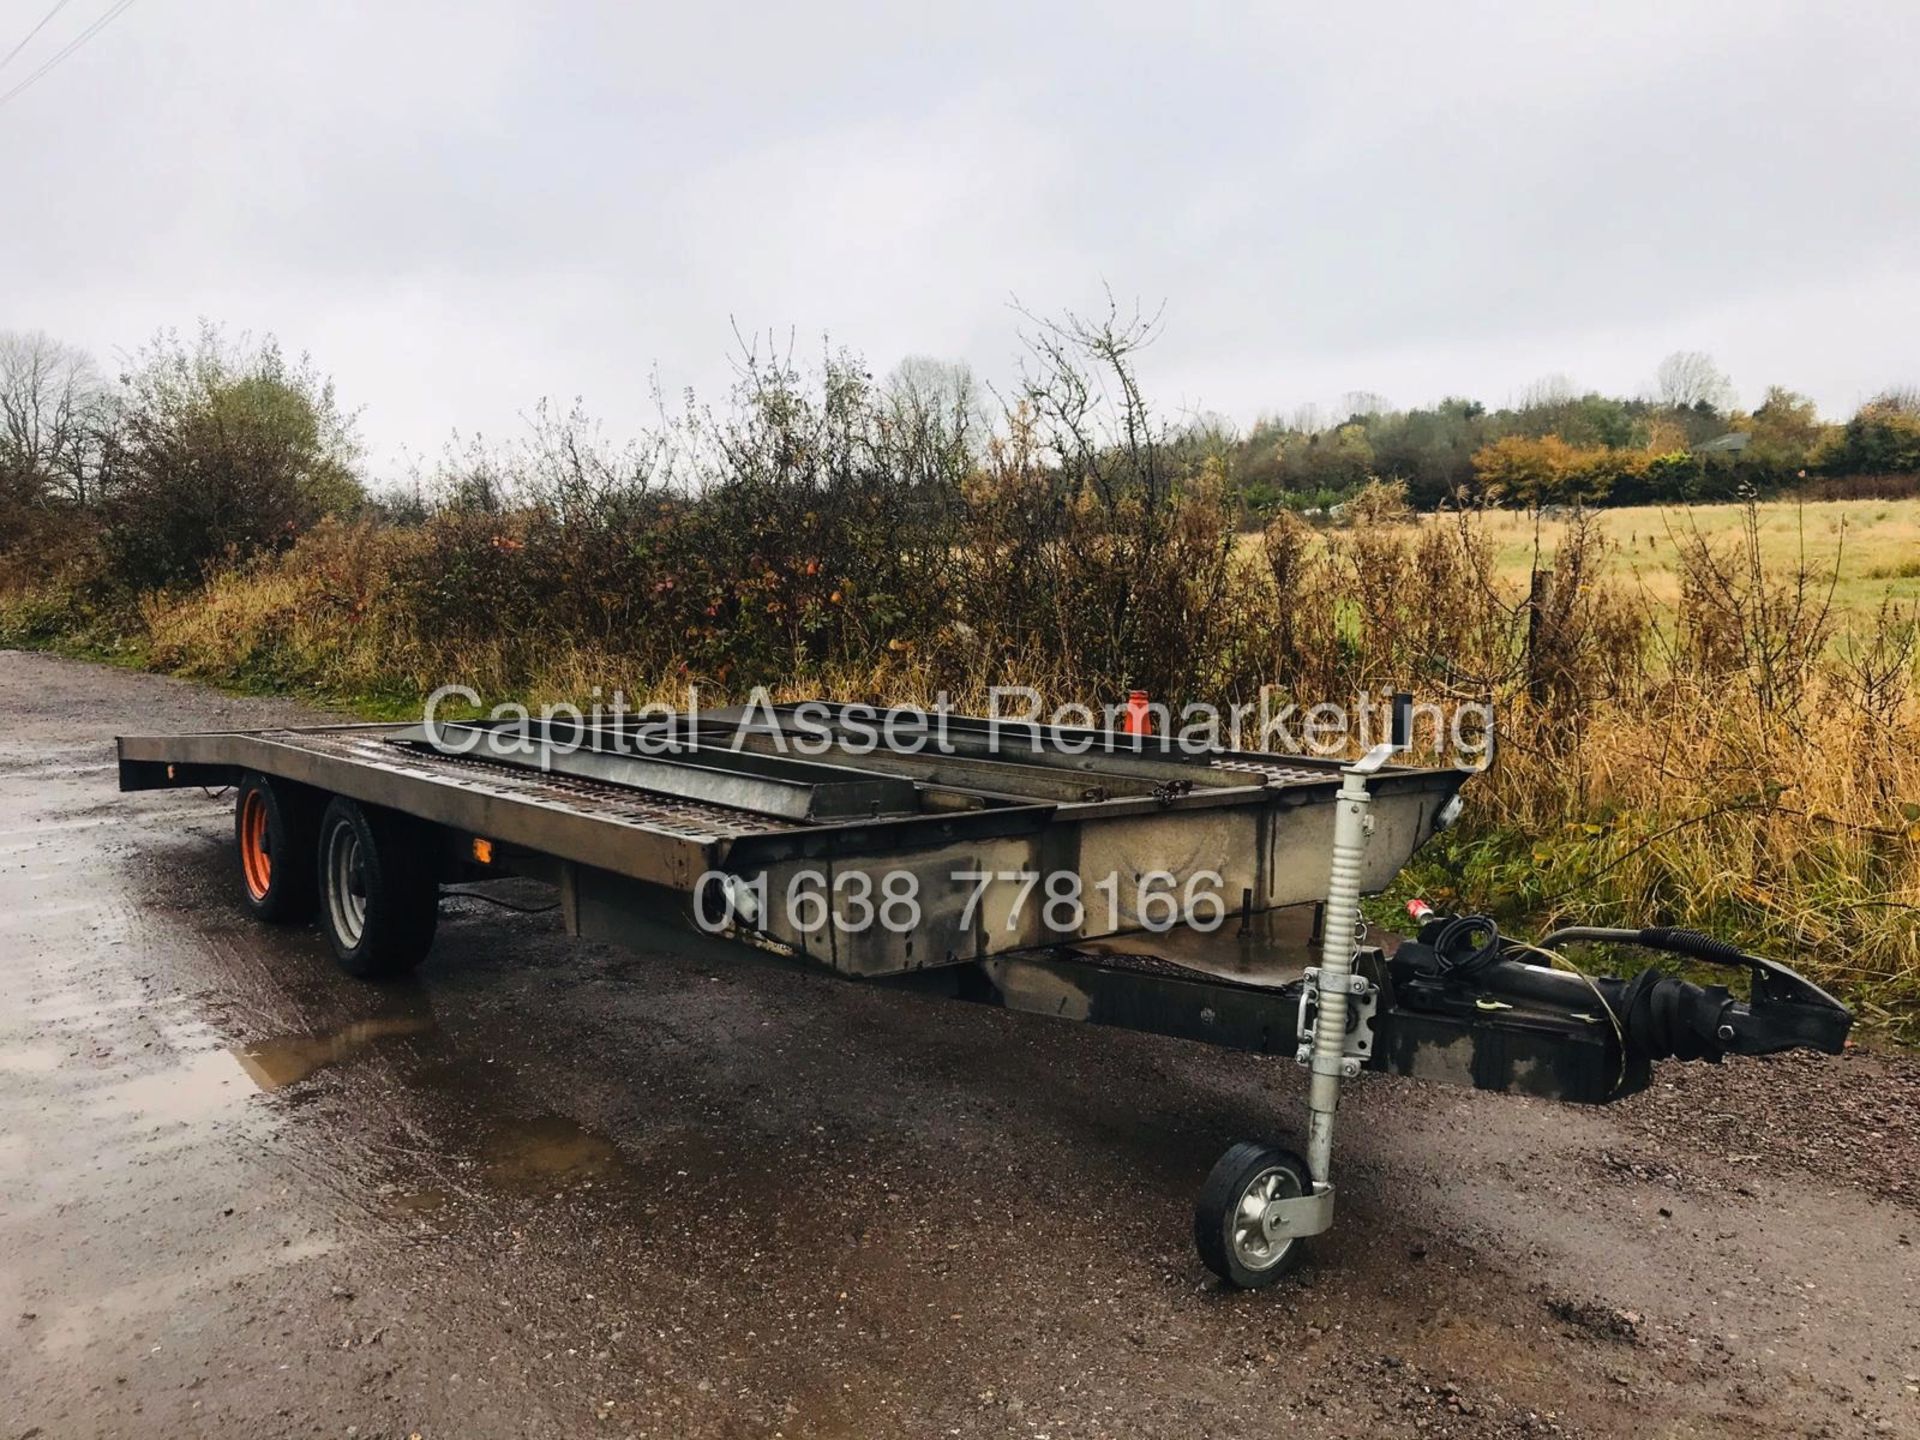 (On Sale) BRIAN JAMES TYPE (PRG) RECOVERY / TRANSPORTER TRAILER - 17 FOOT (NO VAT)